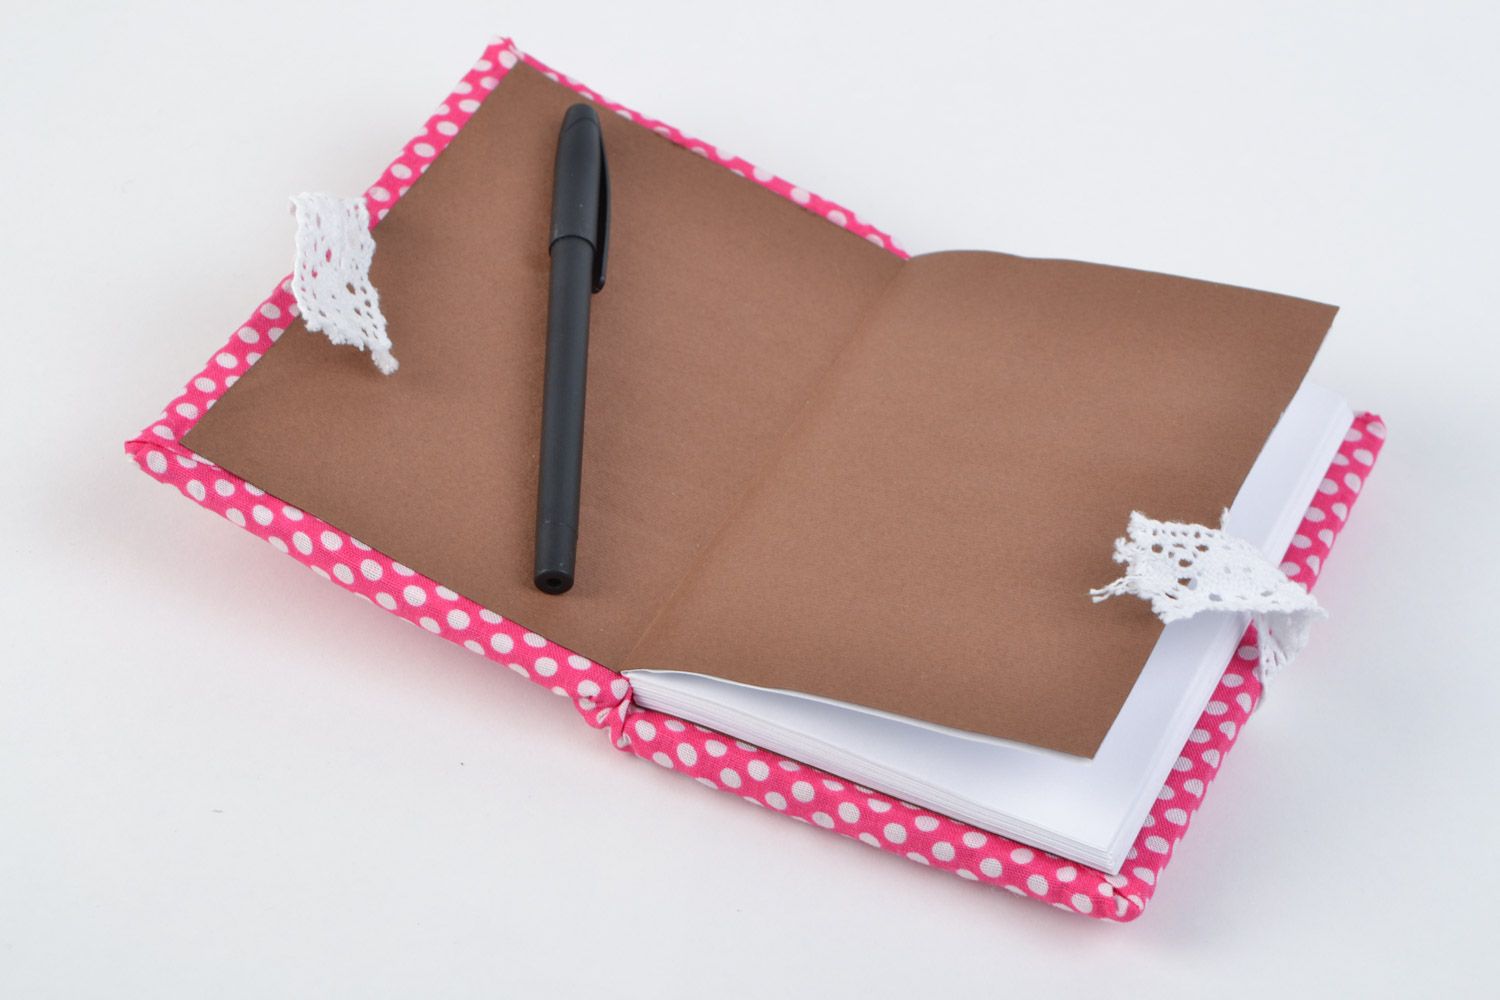 Handmade notebook with bright pink and white polka dot fabric cover for 60 pages photo 3